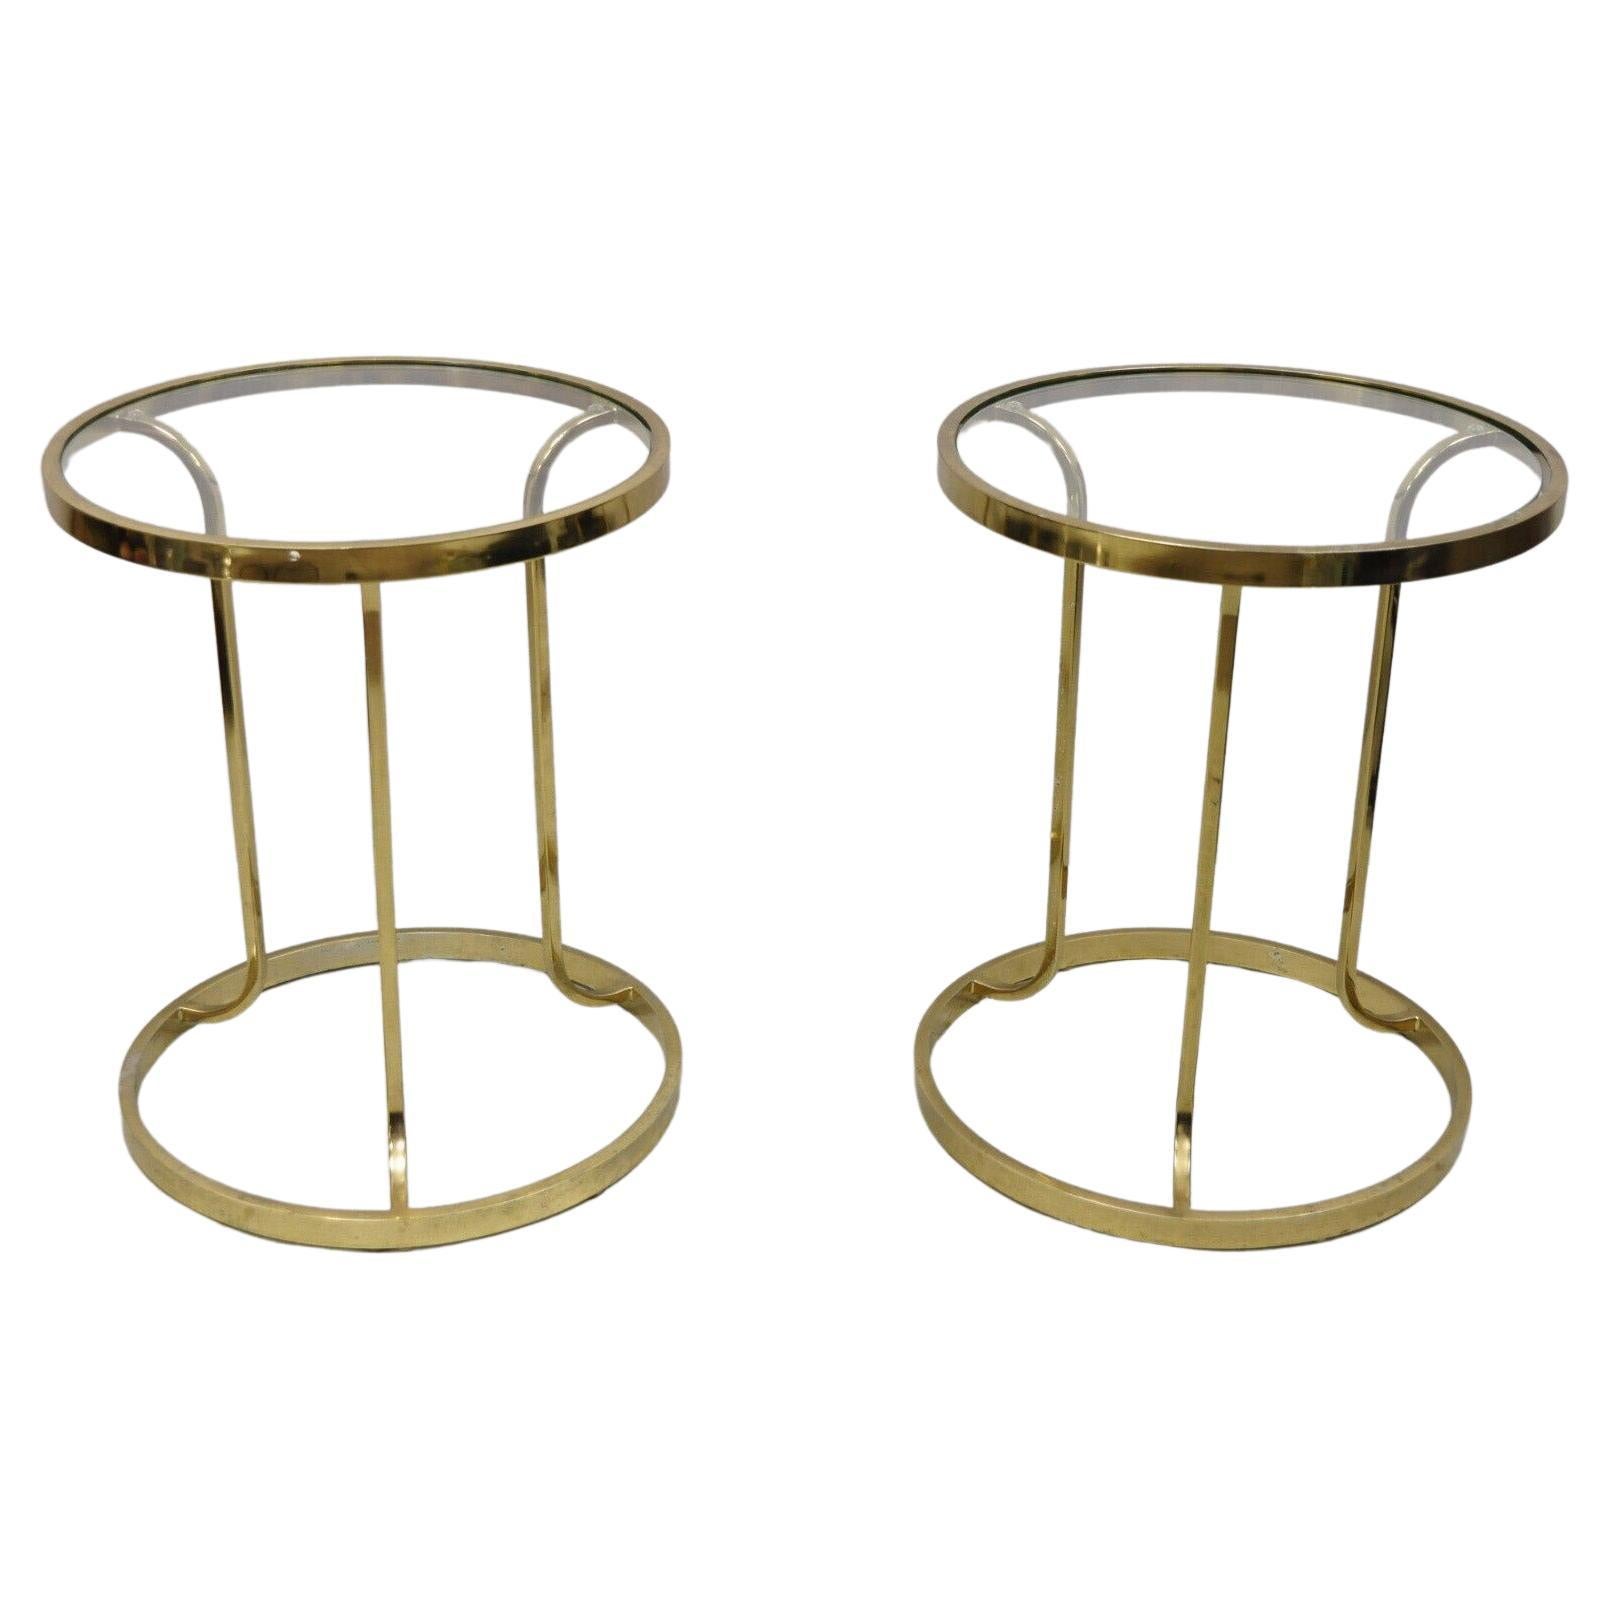 Vintage Midcentury Gold Brass Metal Baughman Style Round Side Tables, a Pair For Sale